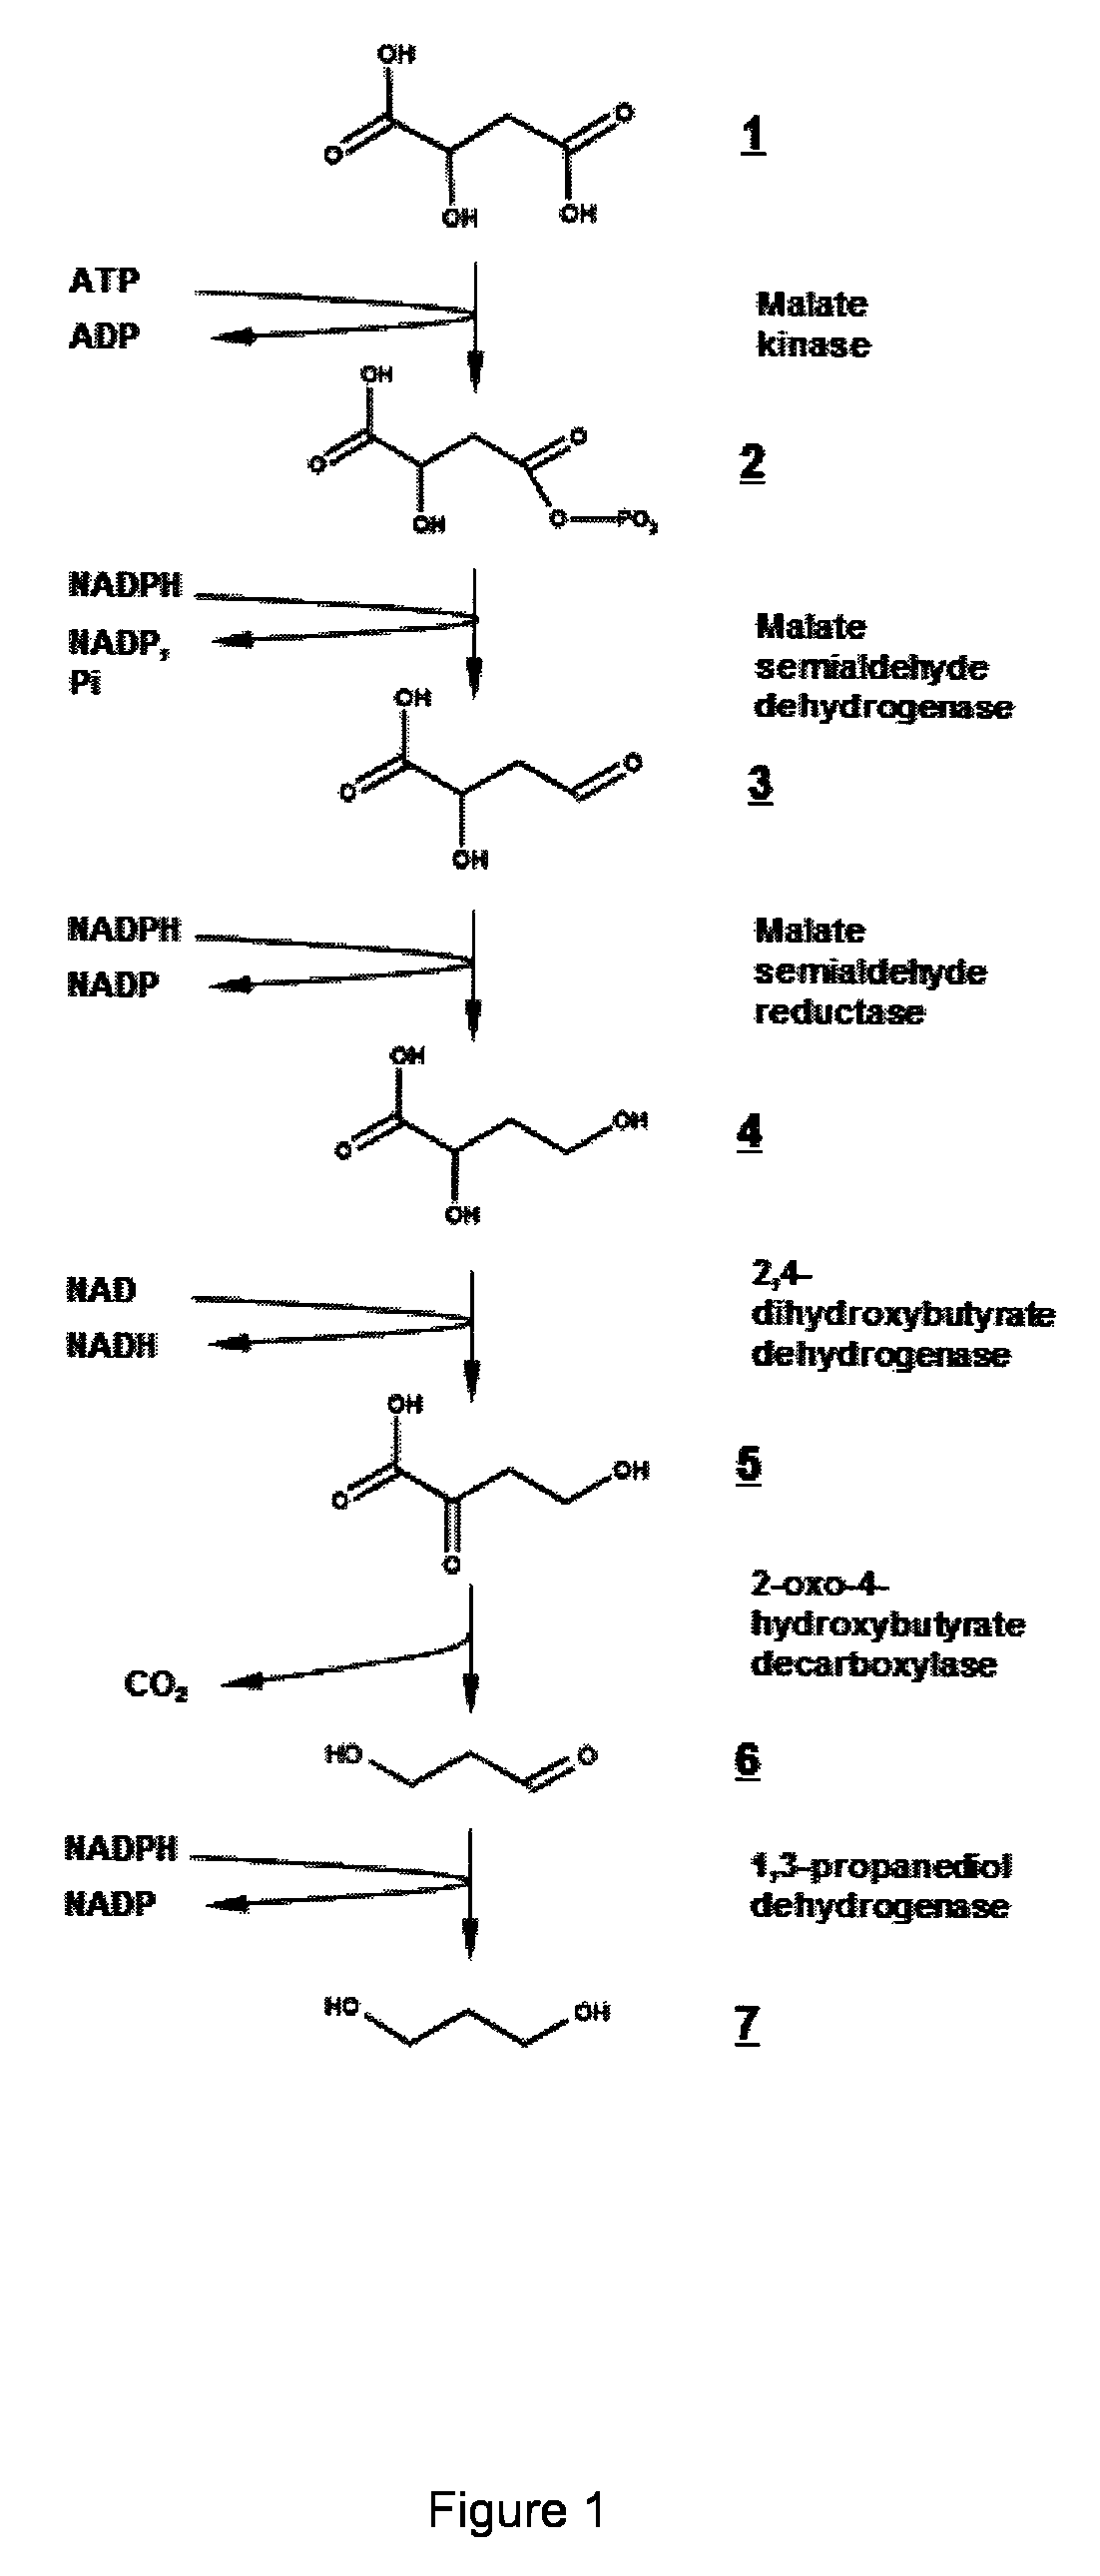 Microorganism modified for the production of 1,3-propanediol